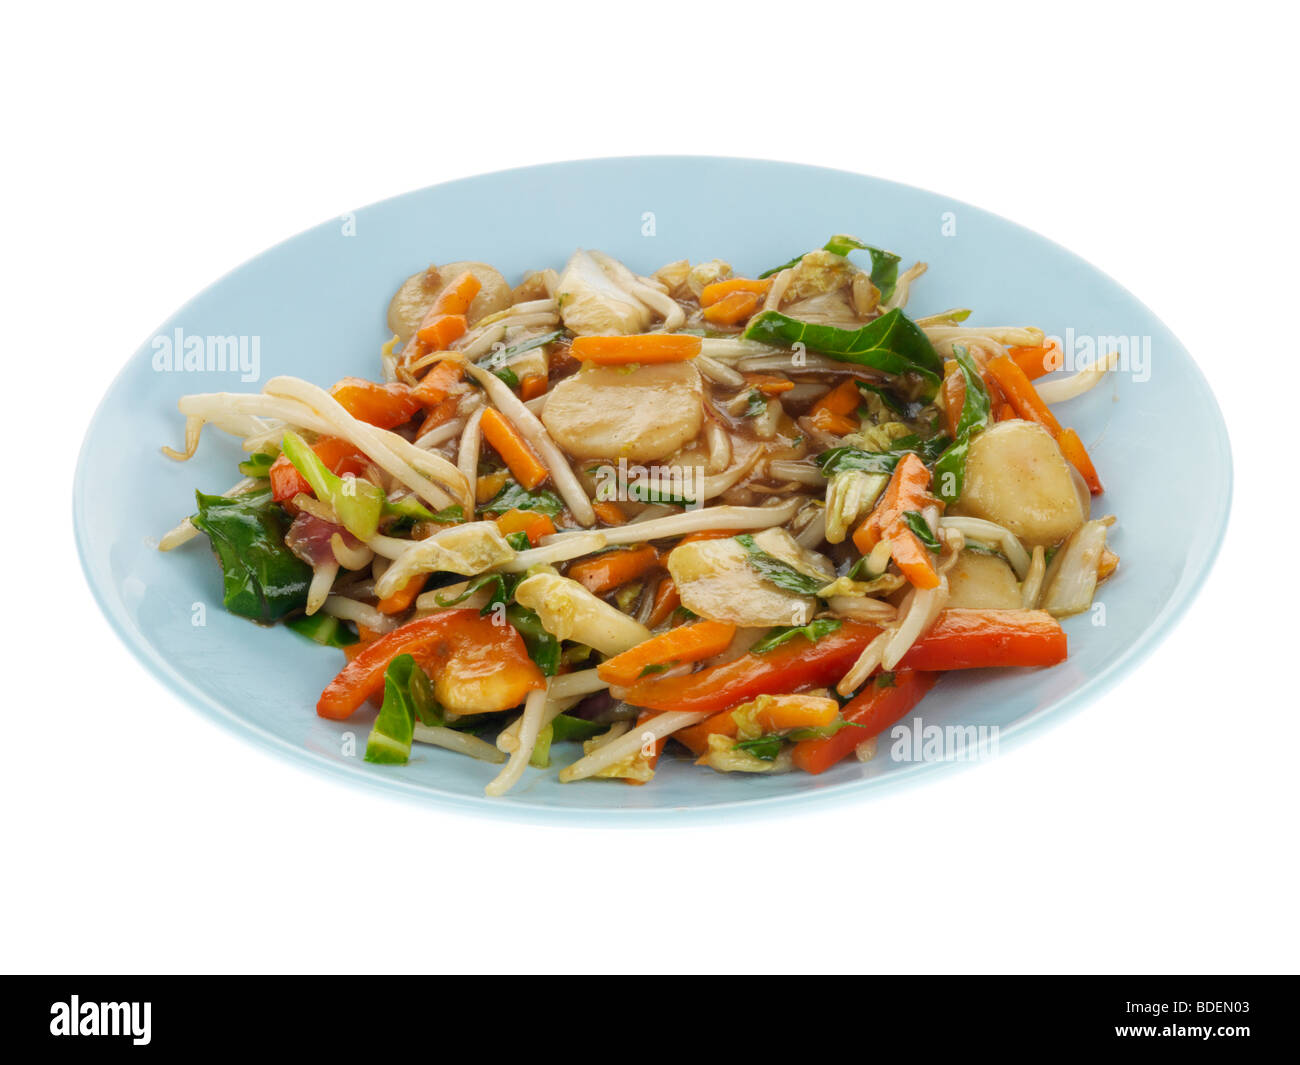 Stirfry Vegetables in Chow Mein Sauce Stock Photo